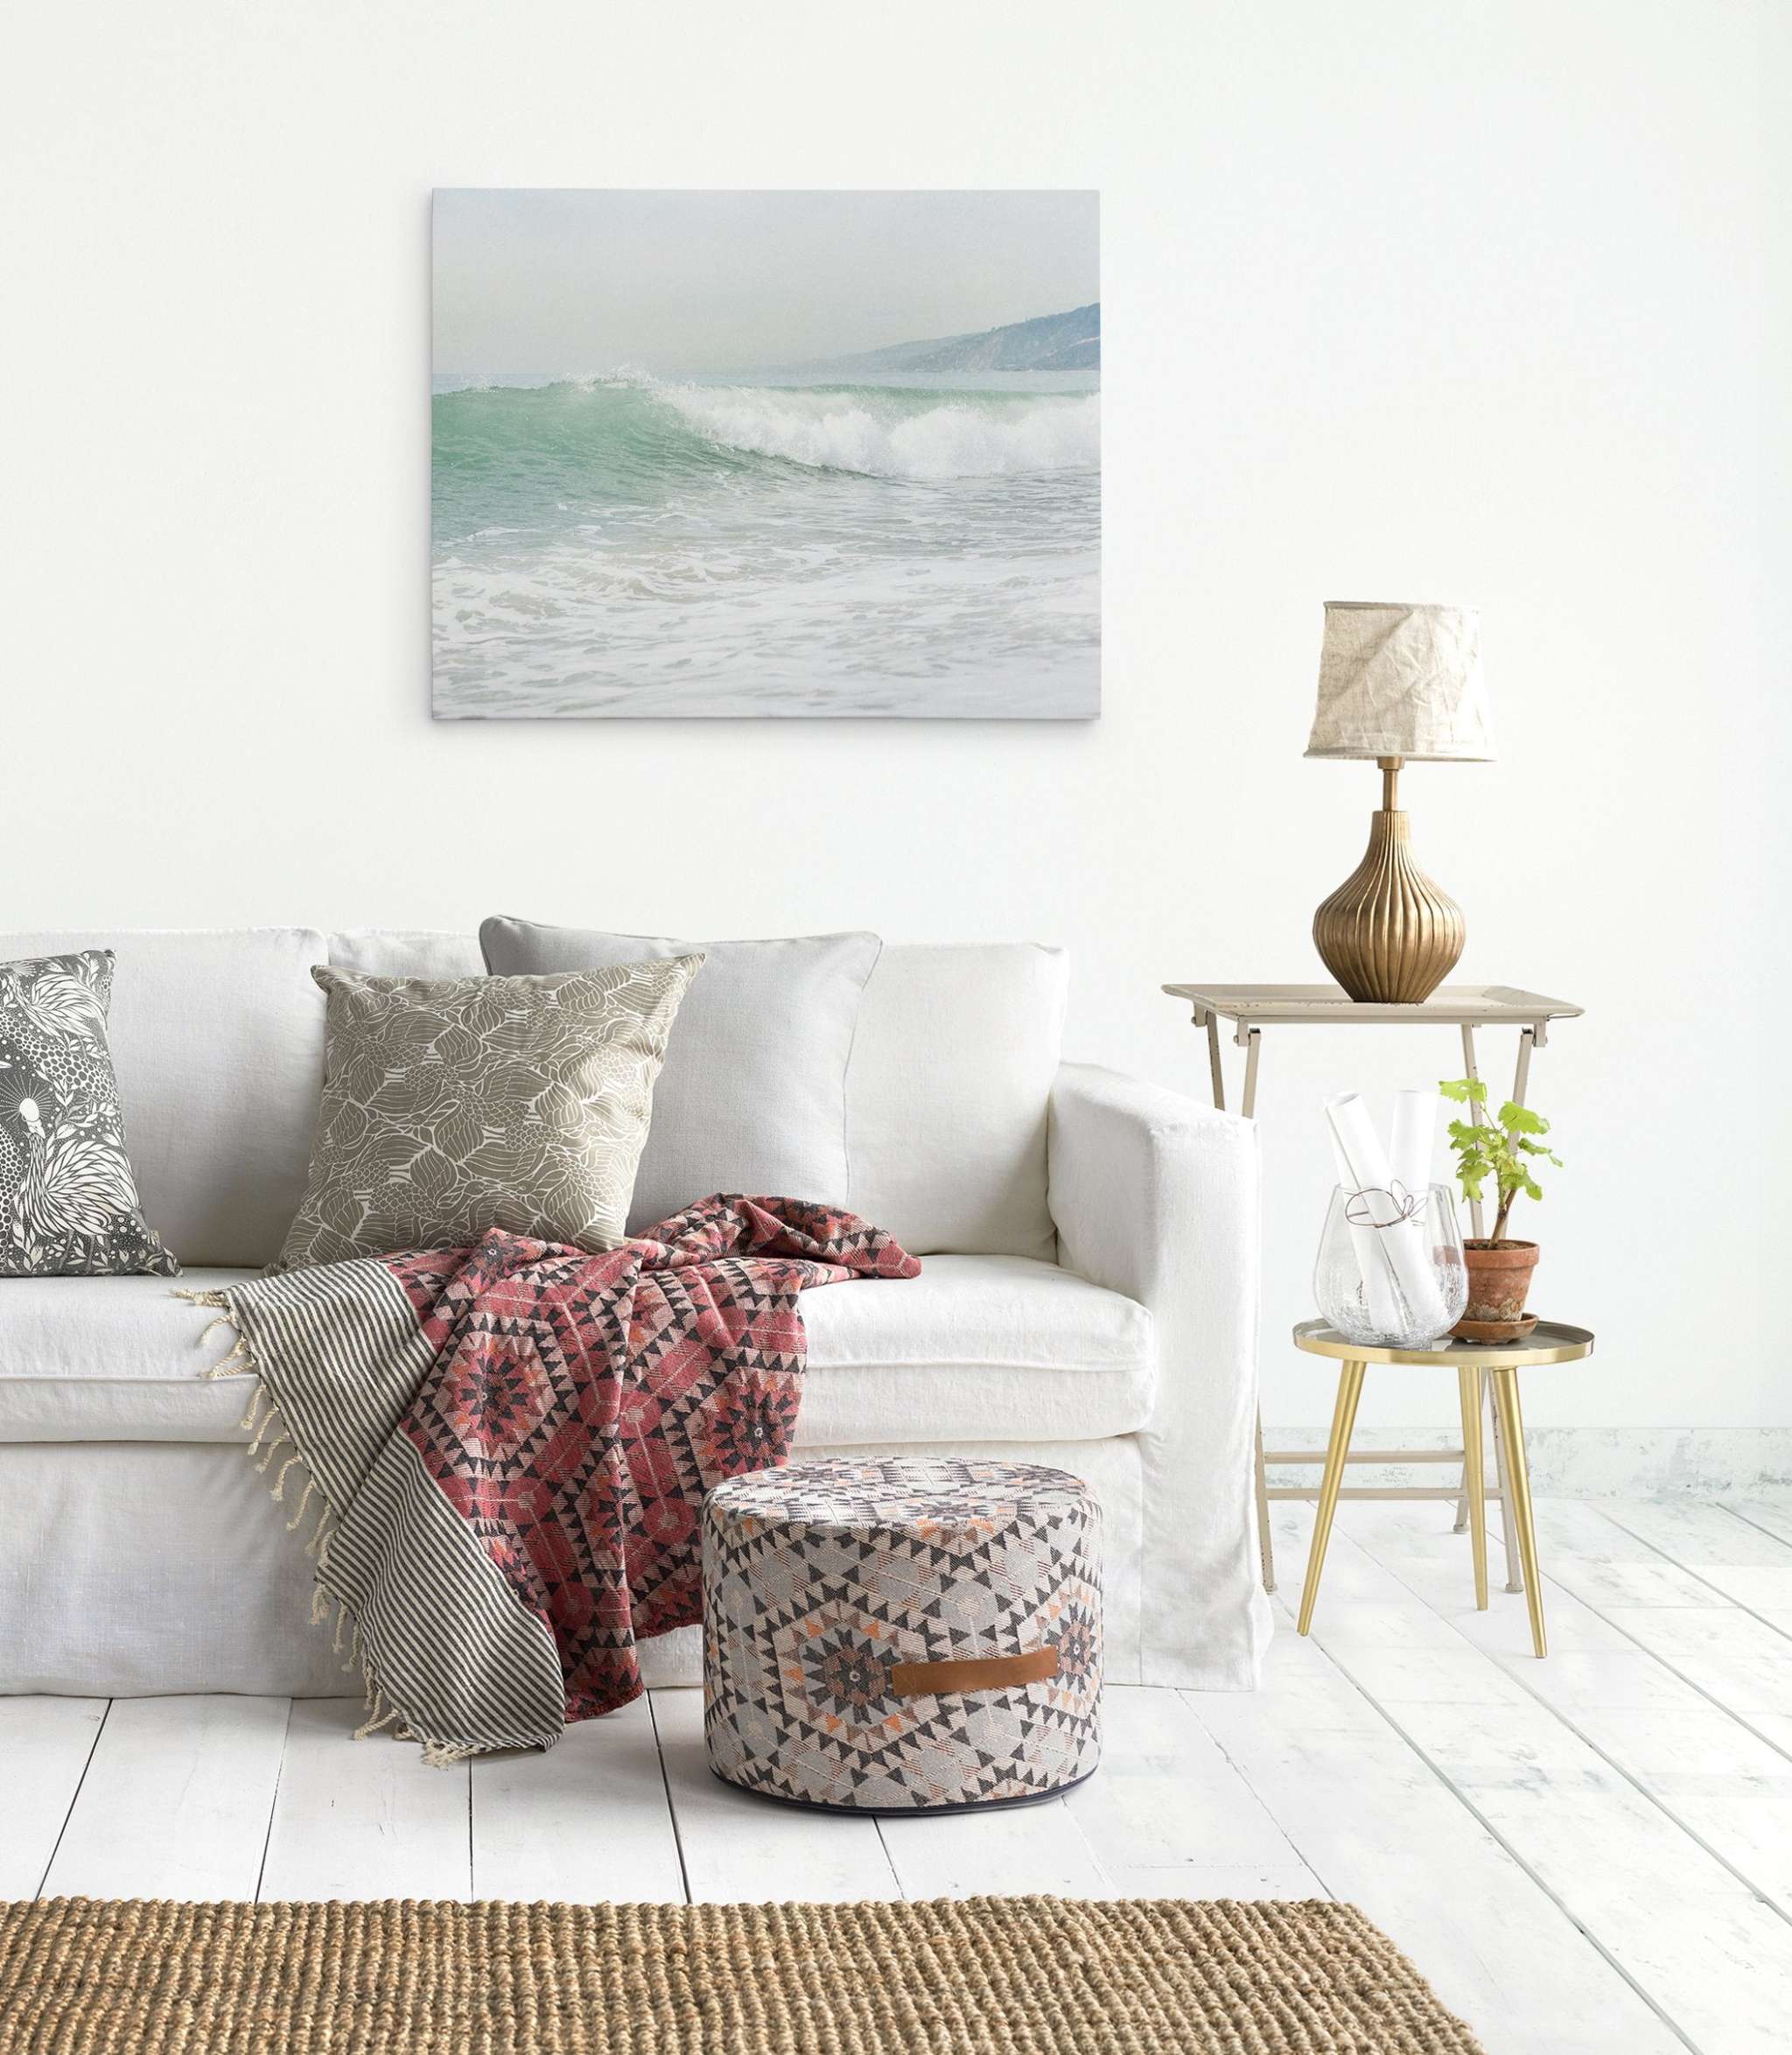 A cozy living room with a white sofa adorned with patterned throw pillows and blankets. A pouf sits in front of the sofa. A side table next to the sofa holds a rustic lamp, a plant, and decorative glassware. Beach-themed wall art on premium artist-grade canvas brings coastal sunshine to the space, like the Coastal Ocean Canvas Waves Wall Art, &#39;Breaking Surf&#39; by Offley Green.